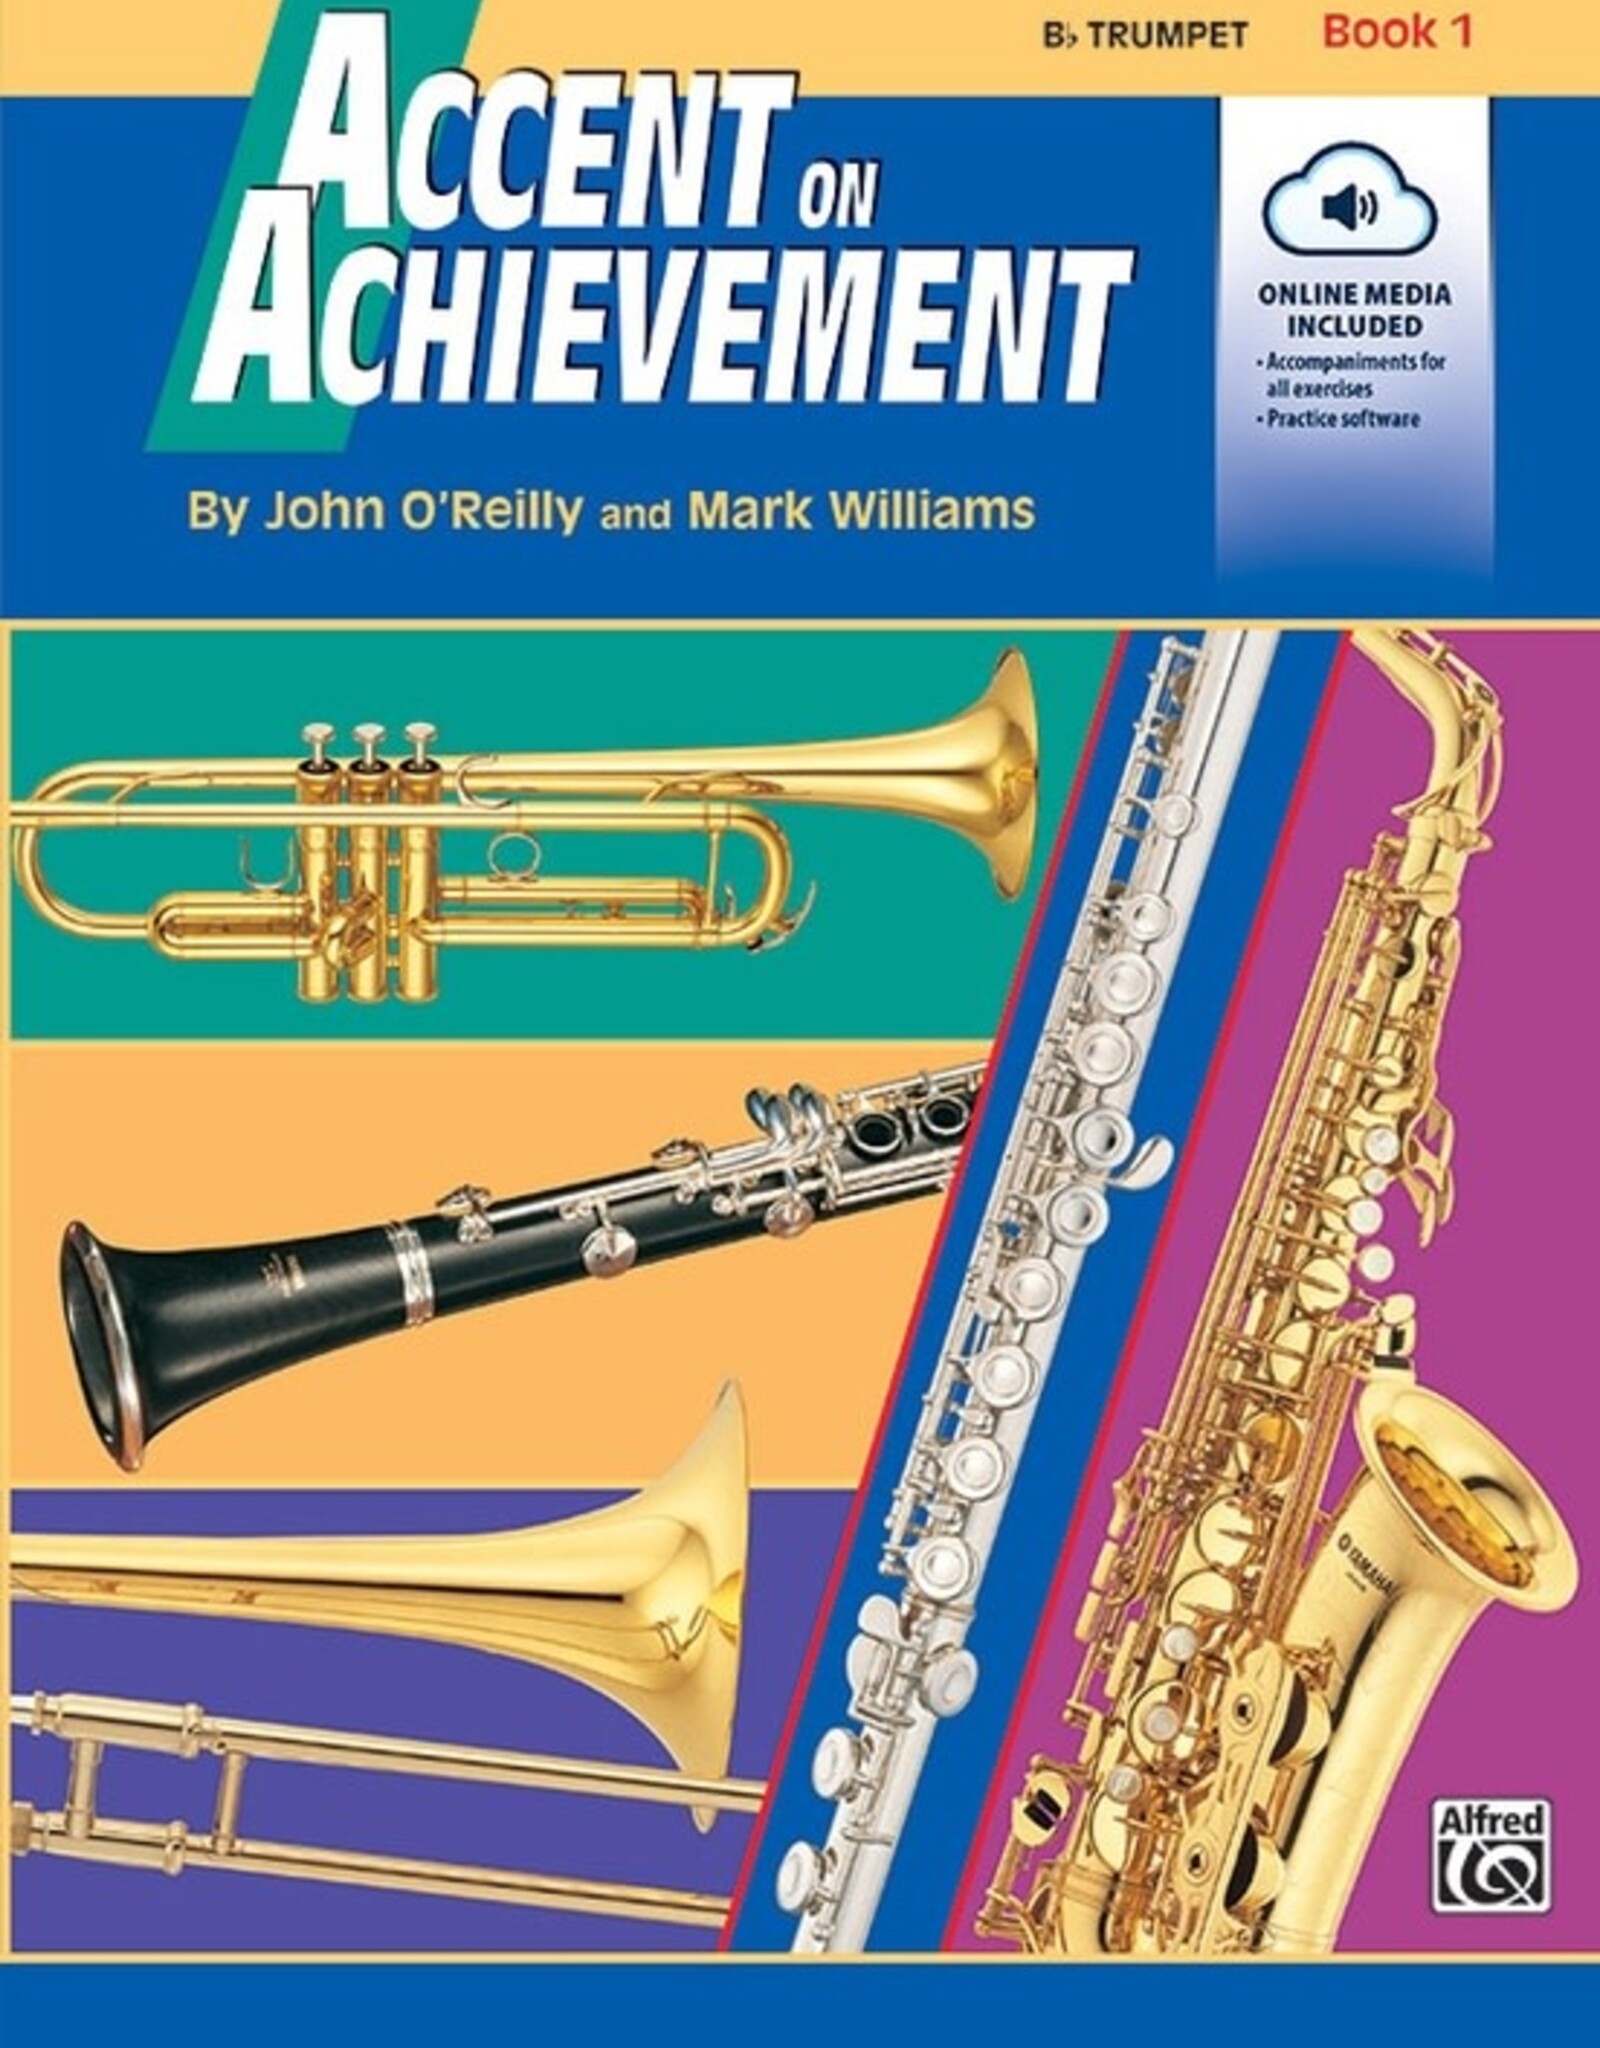 Alfred Accent on Achievement, Book 1 with Online Media - Trumpet